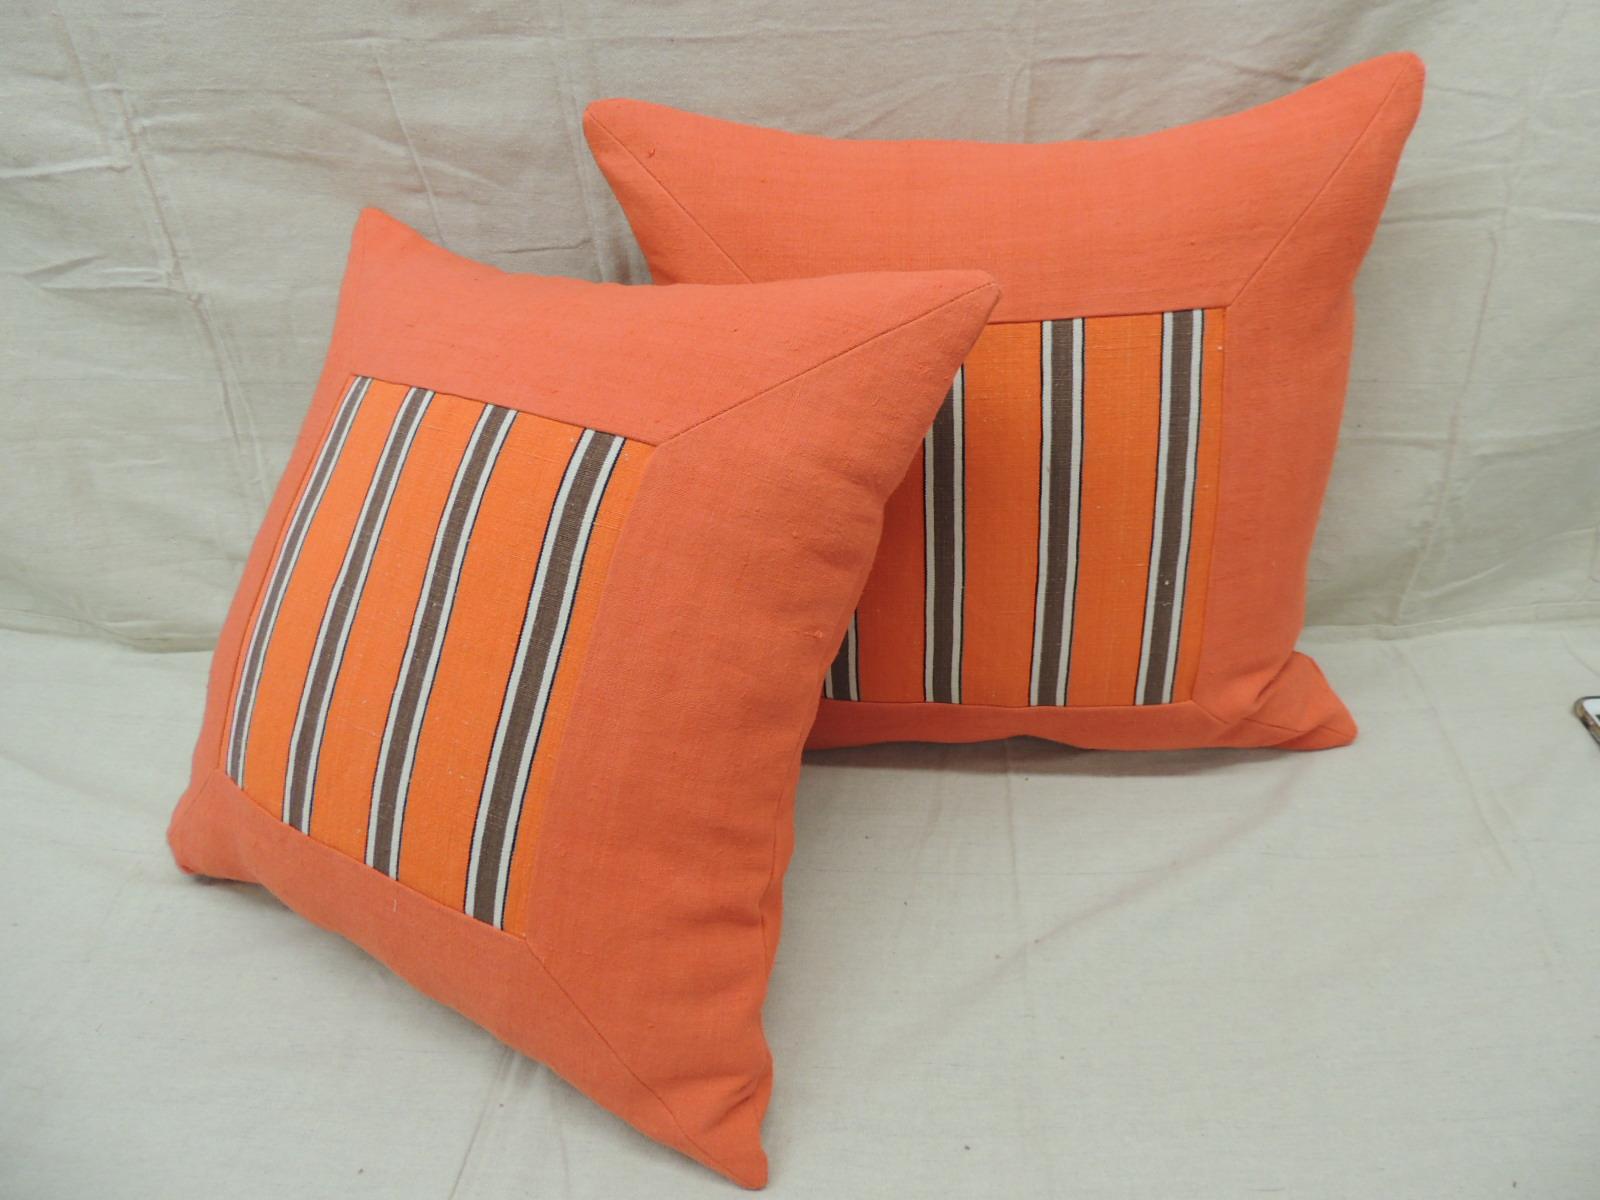 Pair of antique orange stripes square decorative pillows.
Same orange antique linen backings.
Decorative pillow handcrafted and designed in the USA.
Closure by stitch (no zipper closure) with custom made pillow insert.
Size: 20